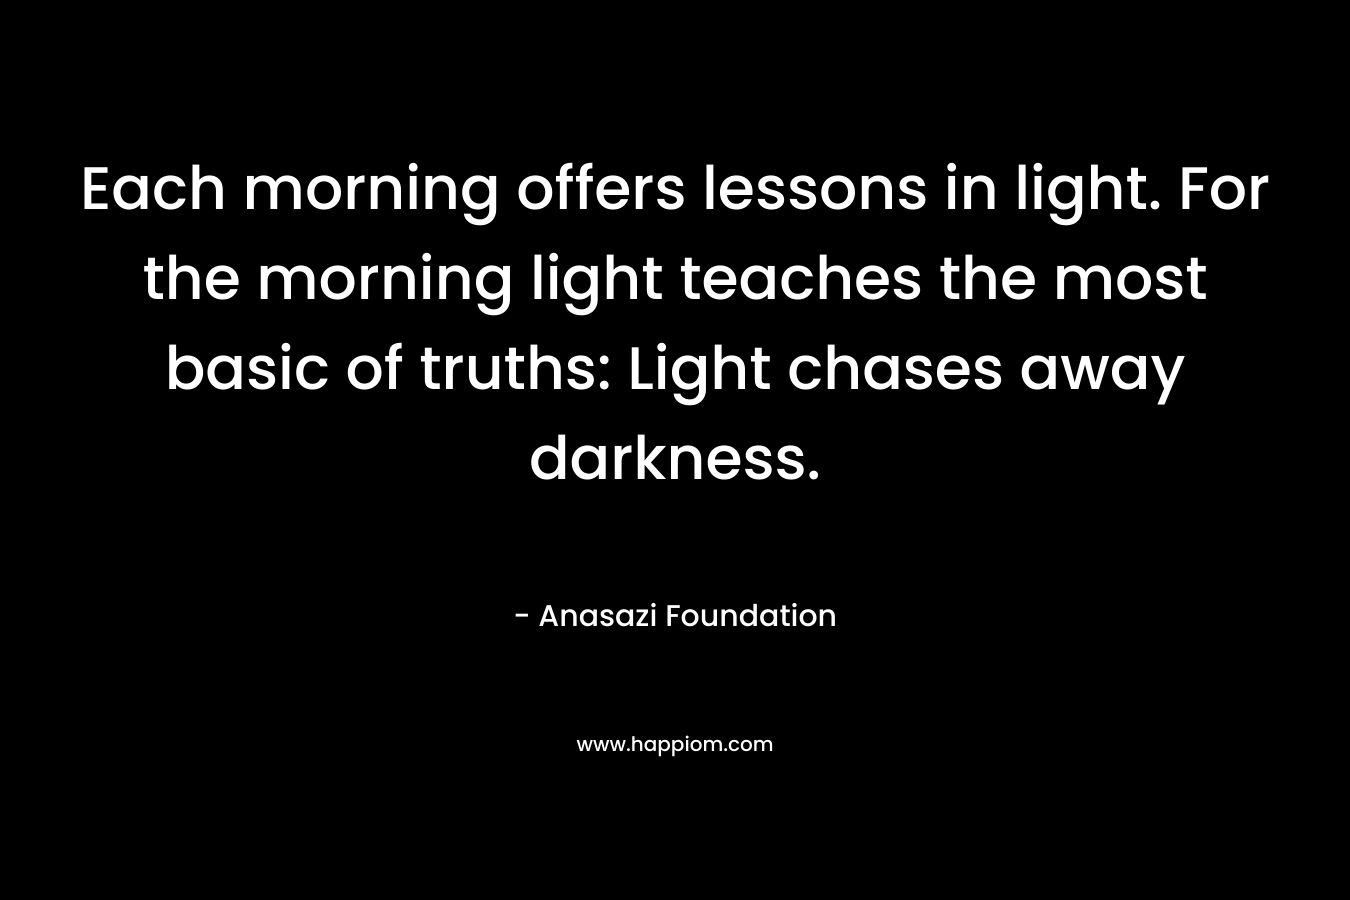 Each morning offers lessons in light. For the morning light teaches the most basic of truths: Light chases away darkness. – Anasazi Foundation